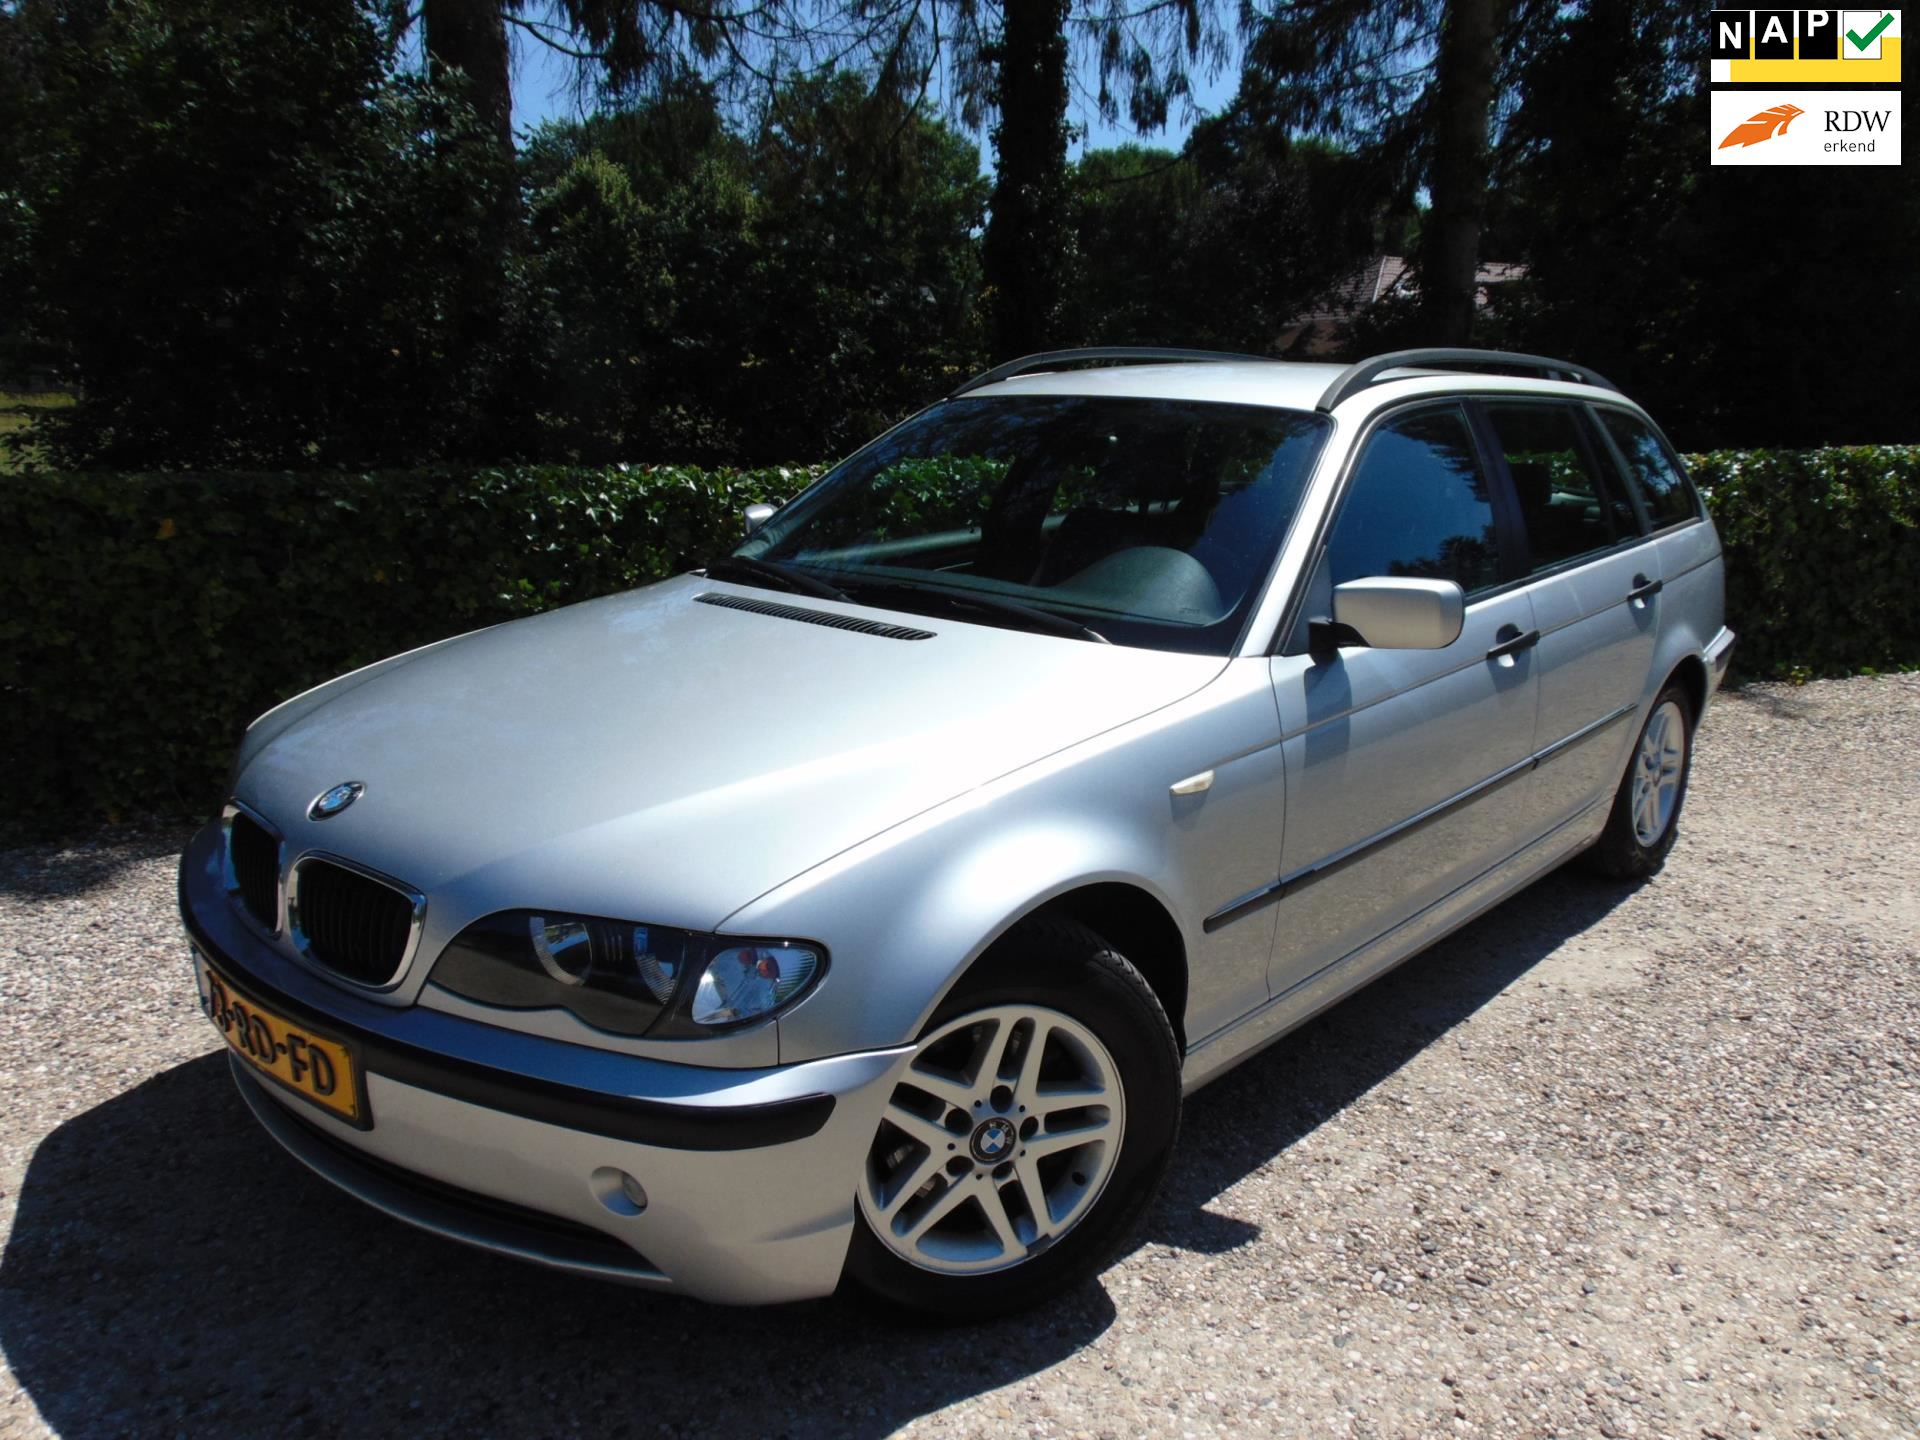 BMW 3-serie Touring occasion - Midden Veluwe Auto's